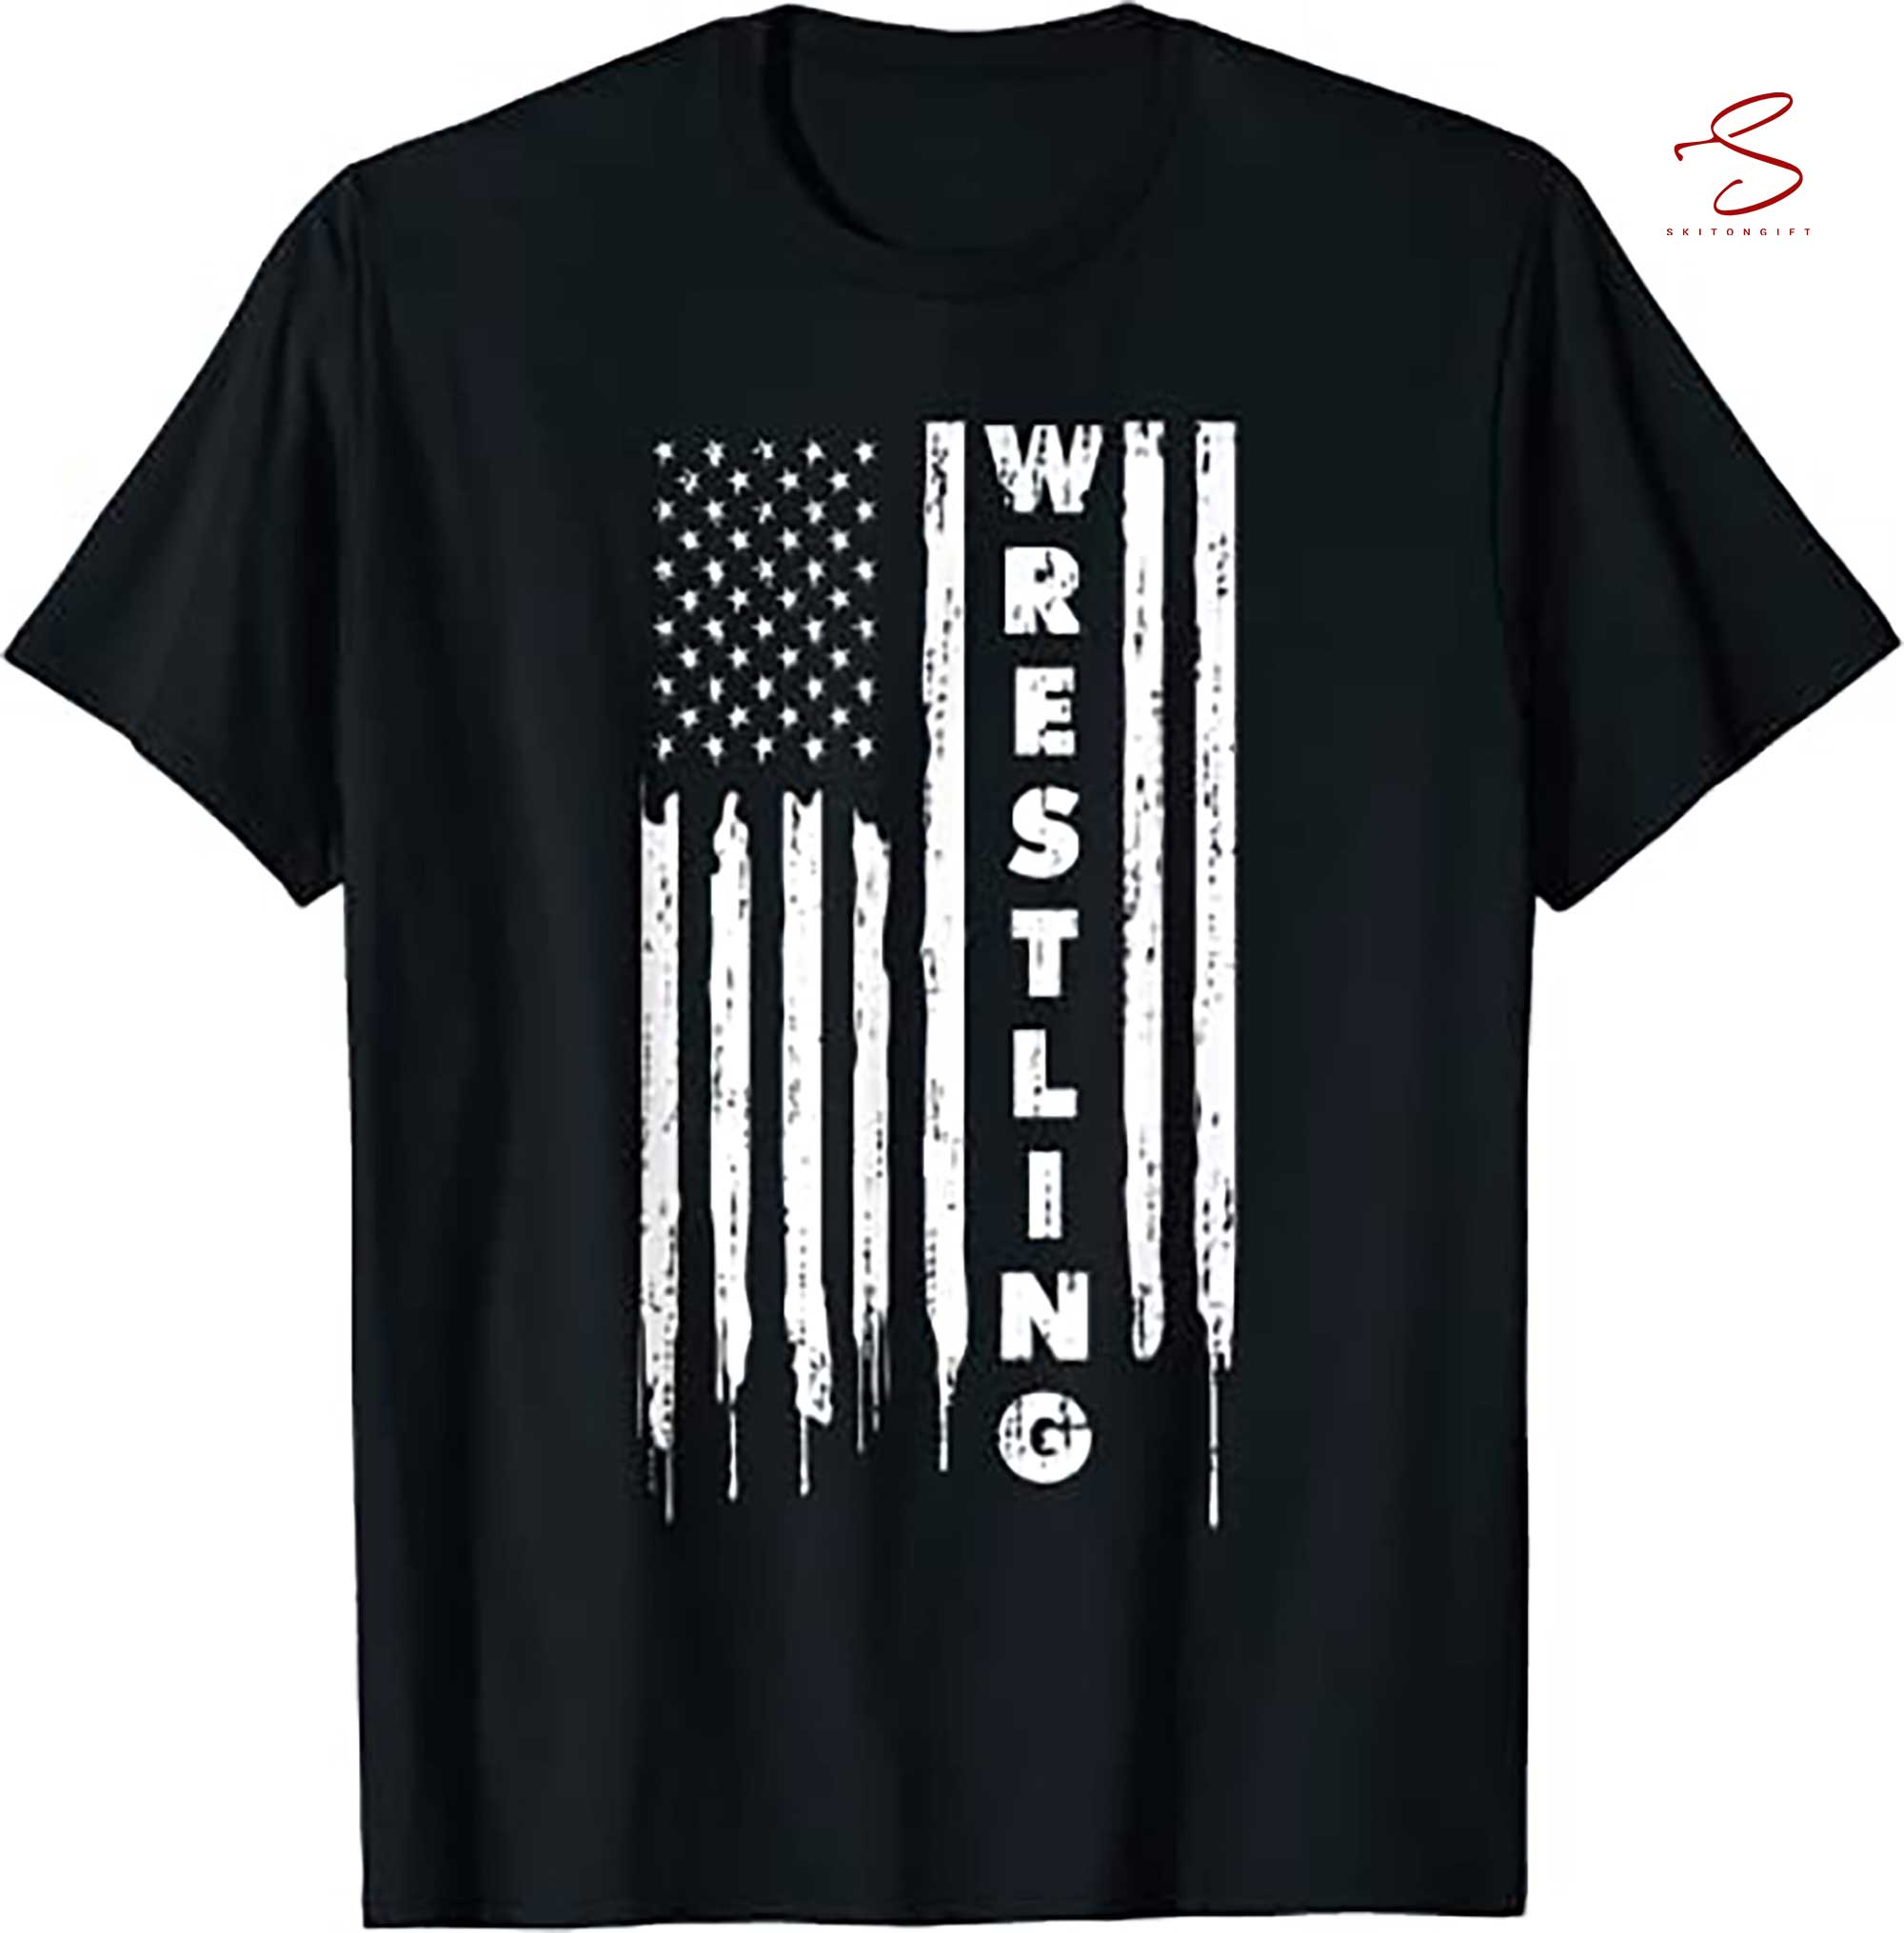 Skitongift Vintage American Flag Wrestling Quote T Shirt Funny Shirts Long Sleeve Tee Hoody Hoodie heavyweight pullover hoodies Sweater